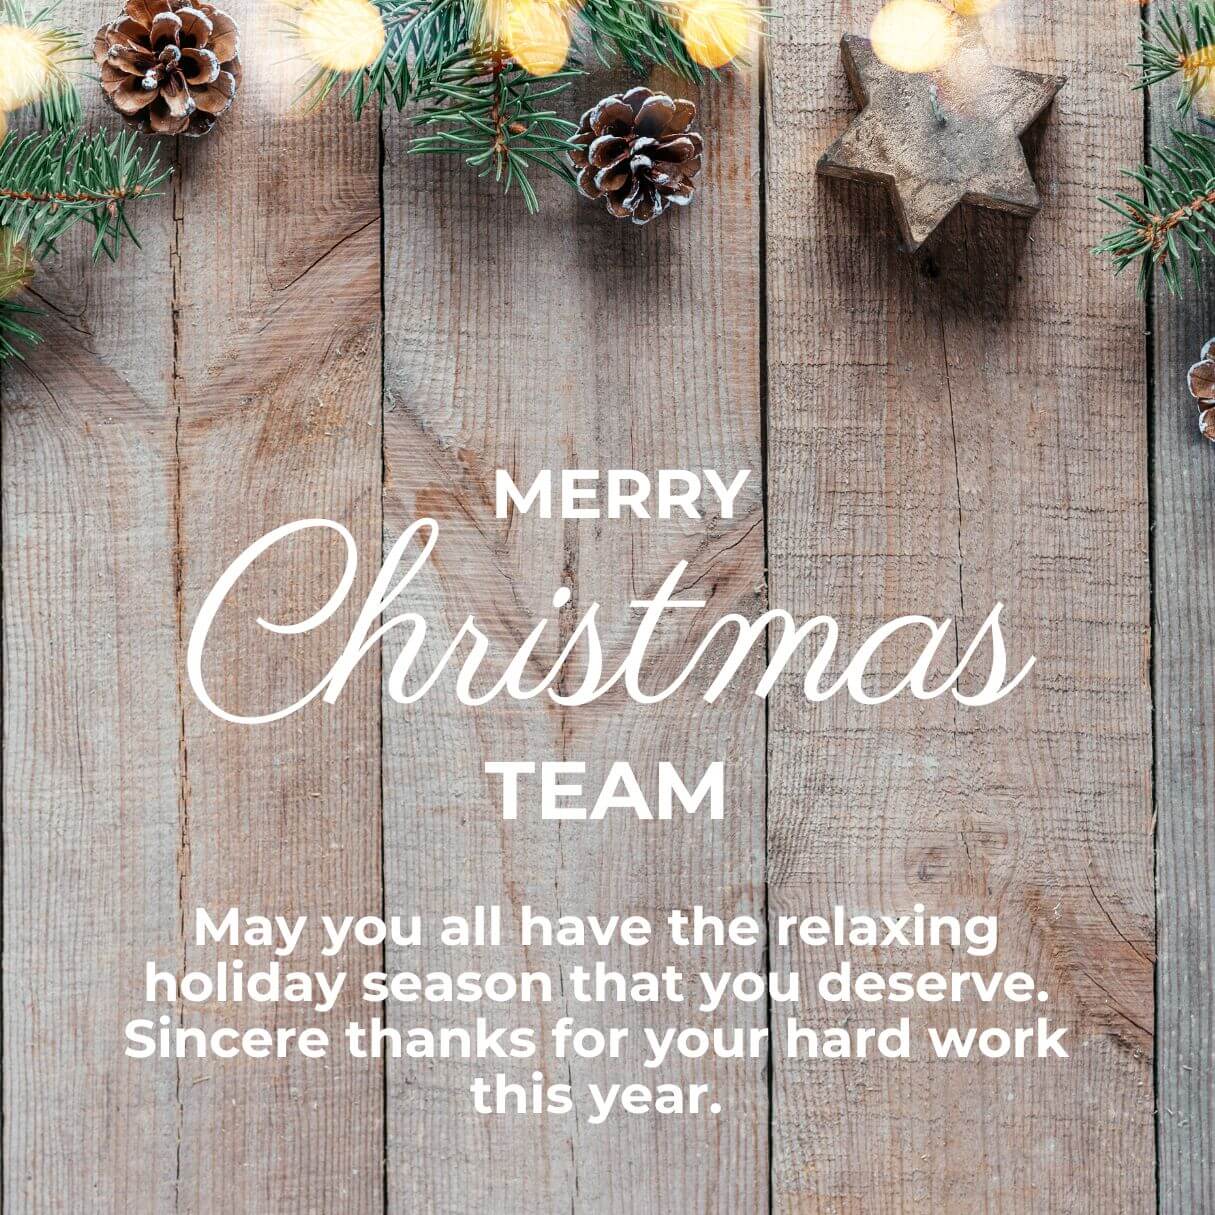 Merry Christmas Wishes For Team Of Employees